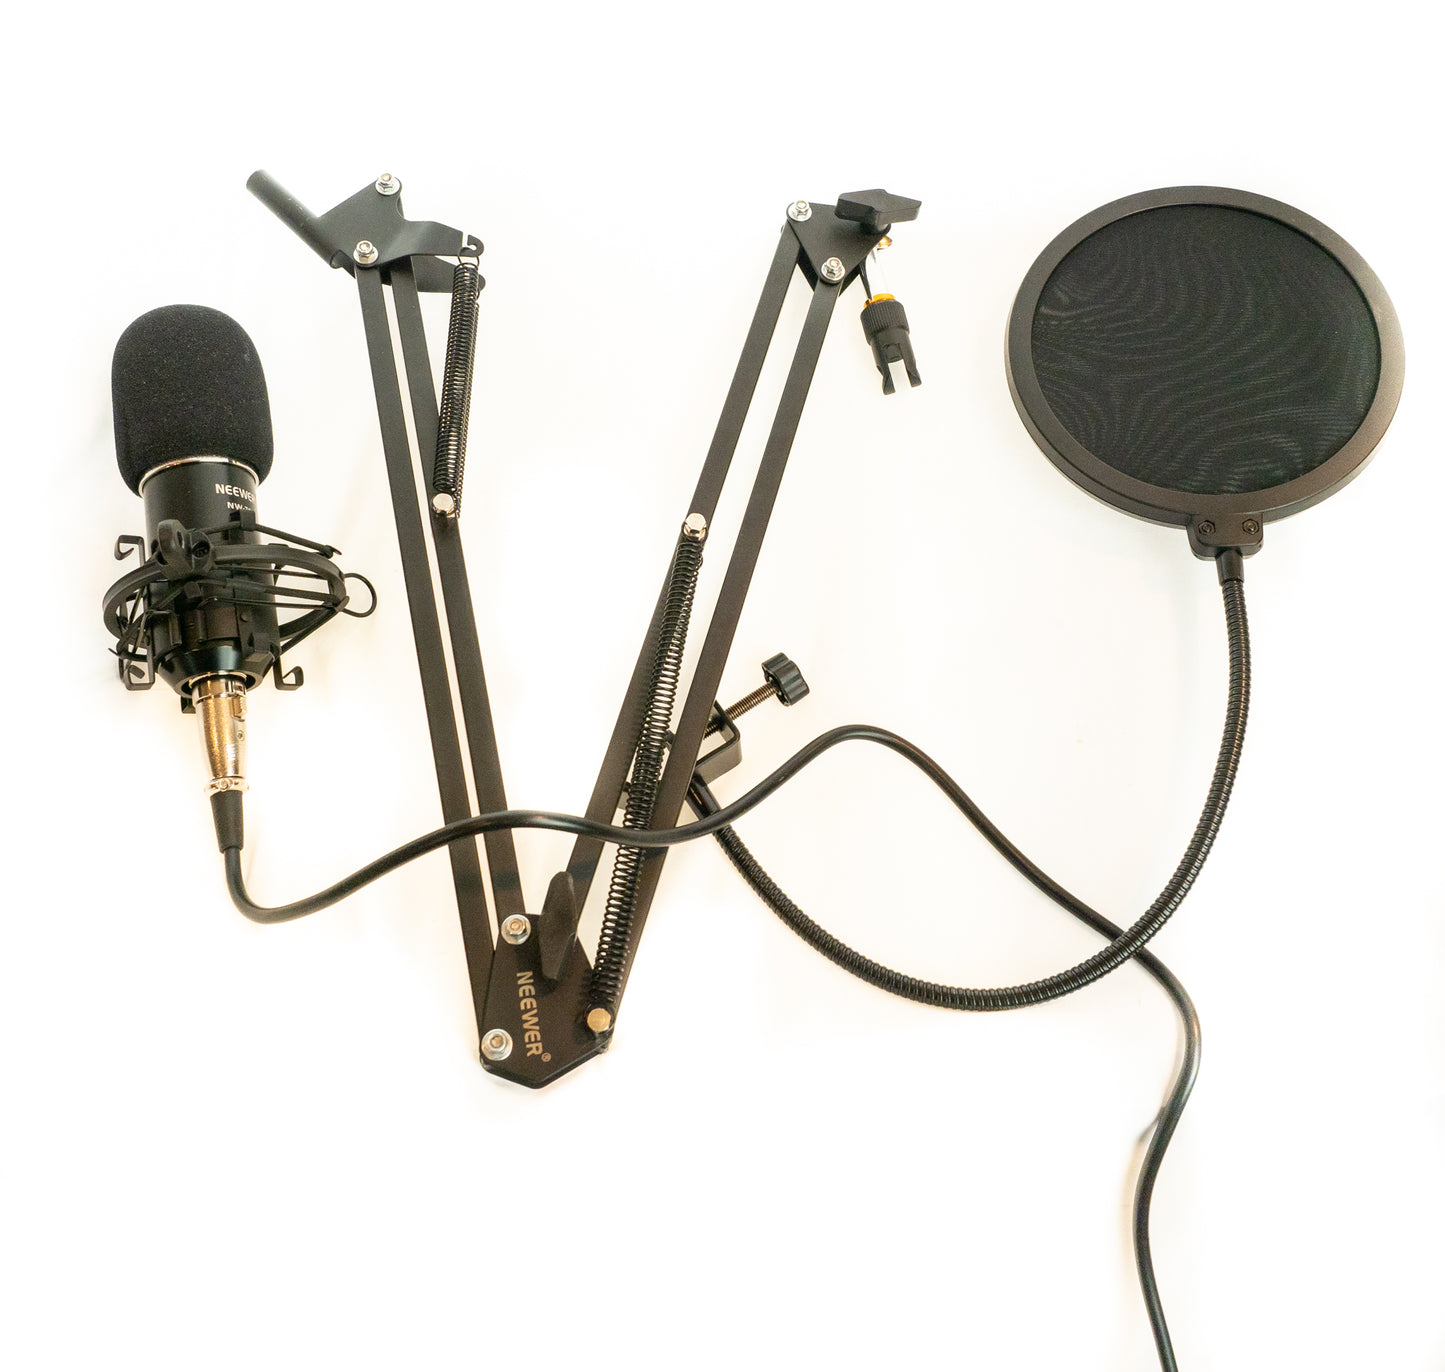 Neewer NW-700 Podcasting kit, microphone, suspension arm, cable and pop filter.